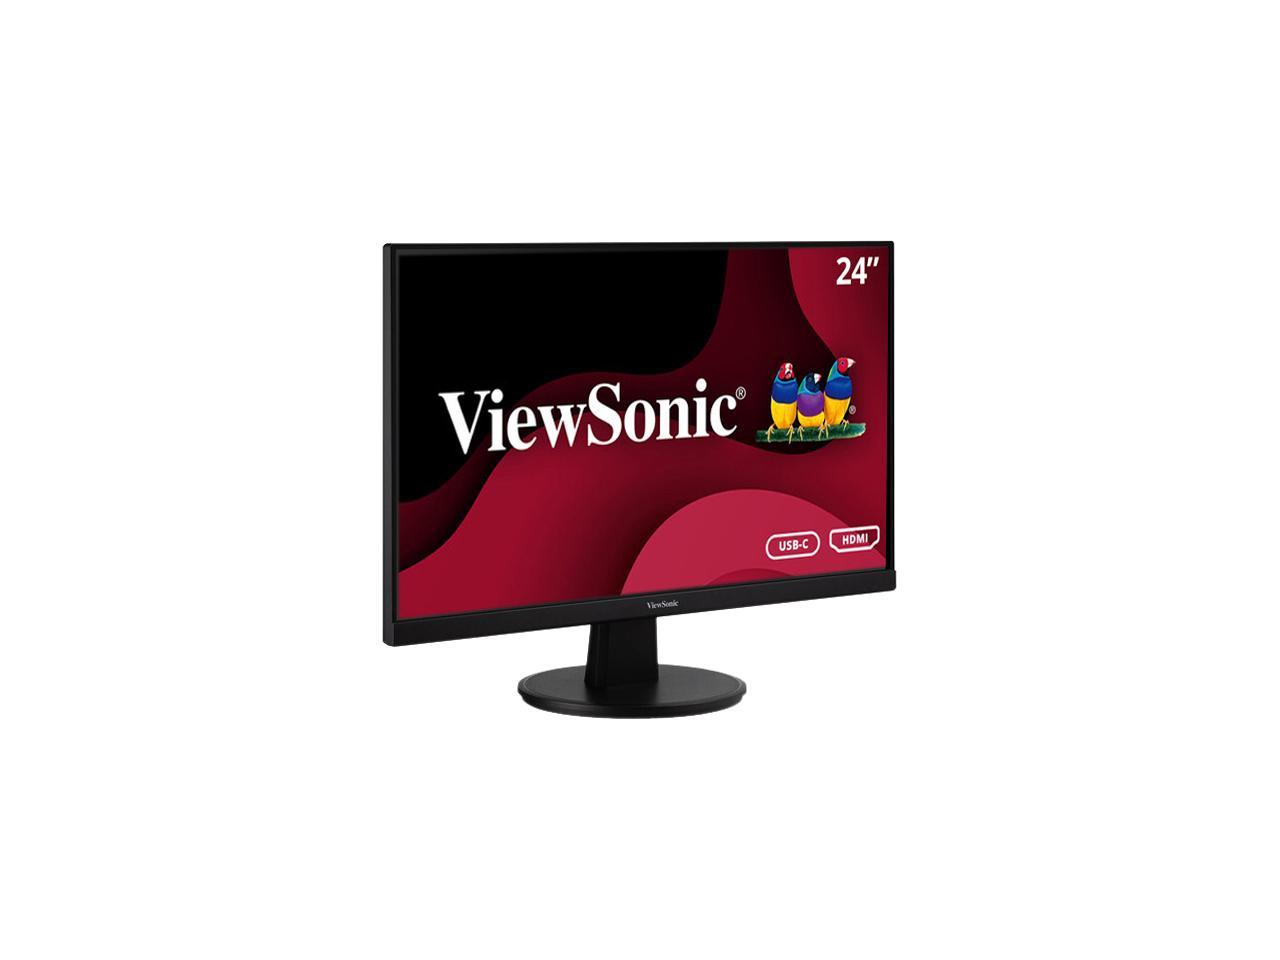 ViewSonic VA2447-MHU 24 Inch Full HD 1080p Monitor with Ultra-Thin Bezel, Adaptive Sync, 75Hz, Eye Care, and HDMI, VGA, USB-C Inputs for Home and Office